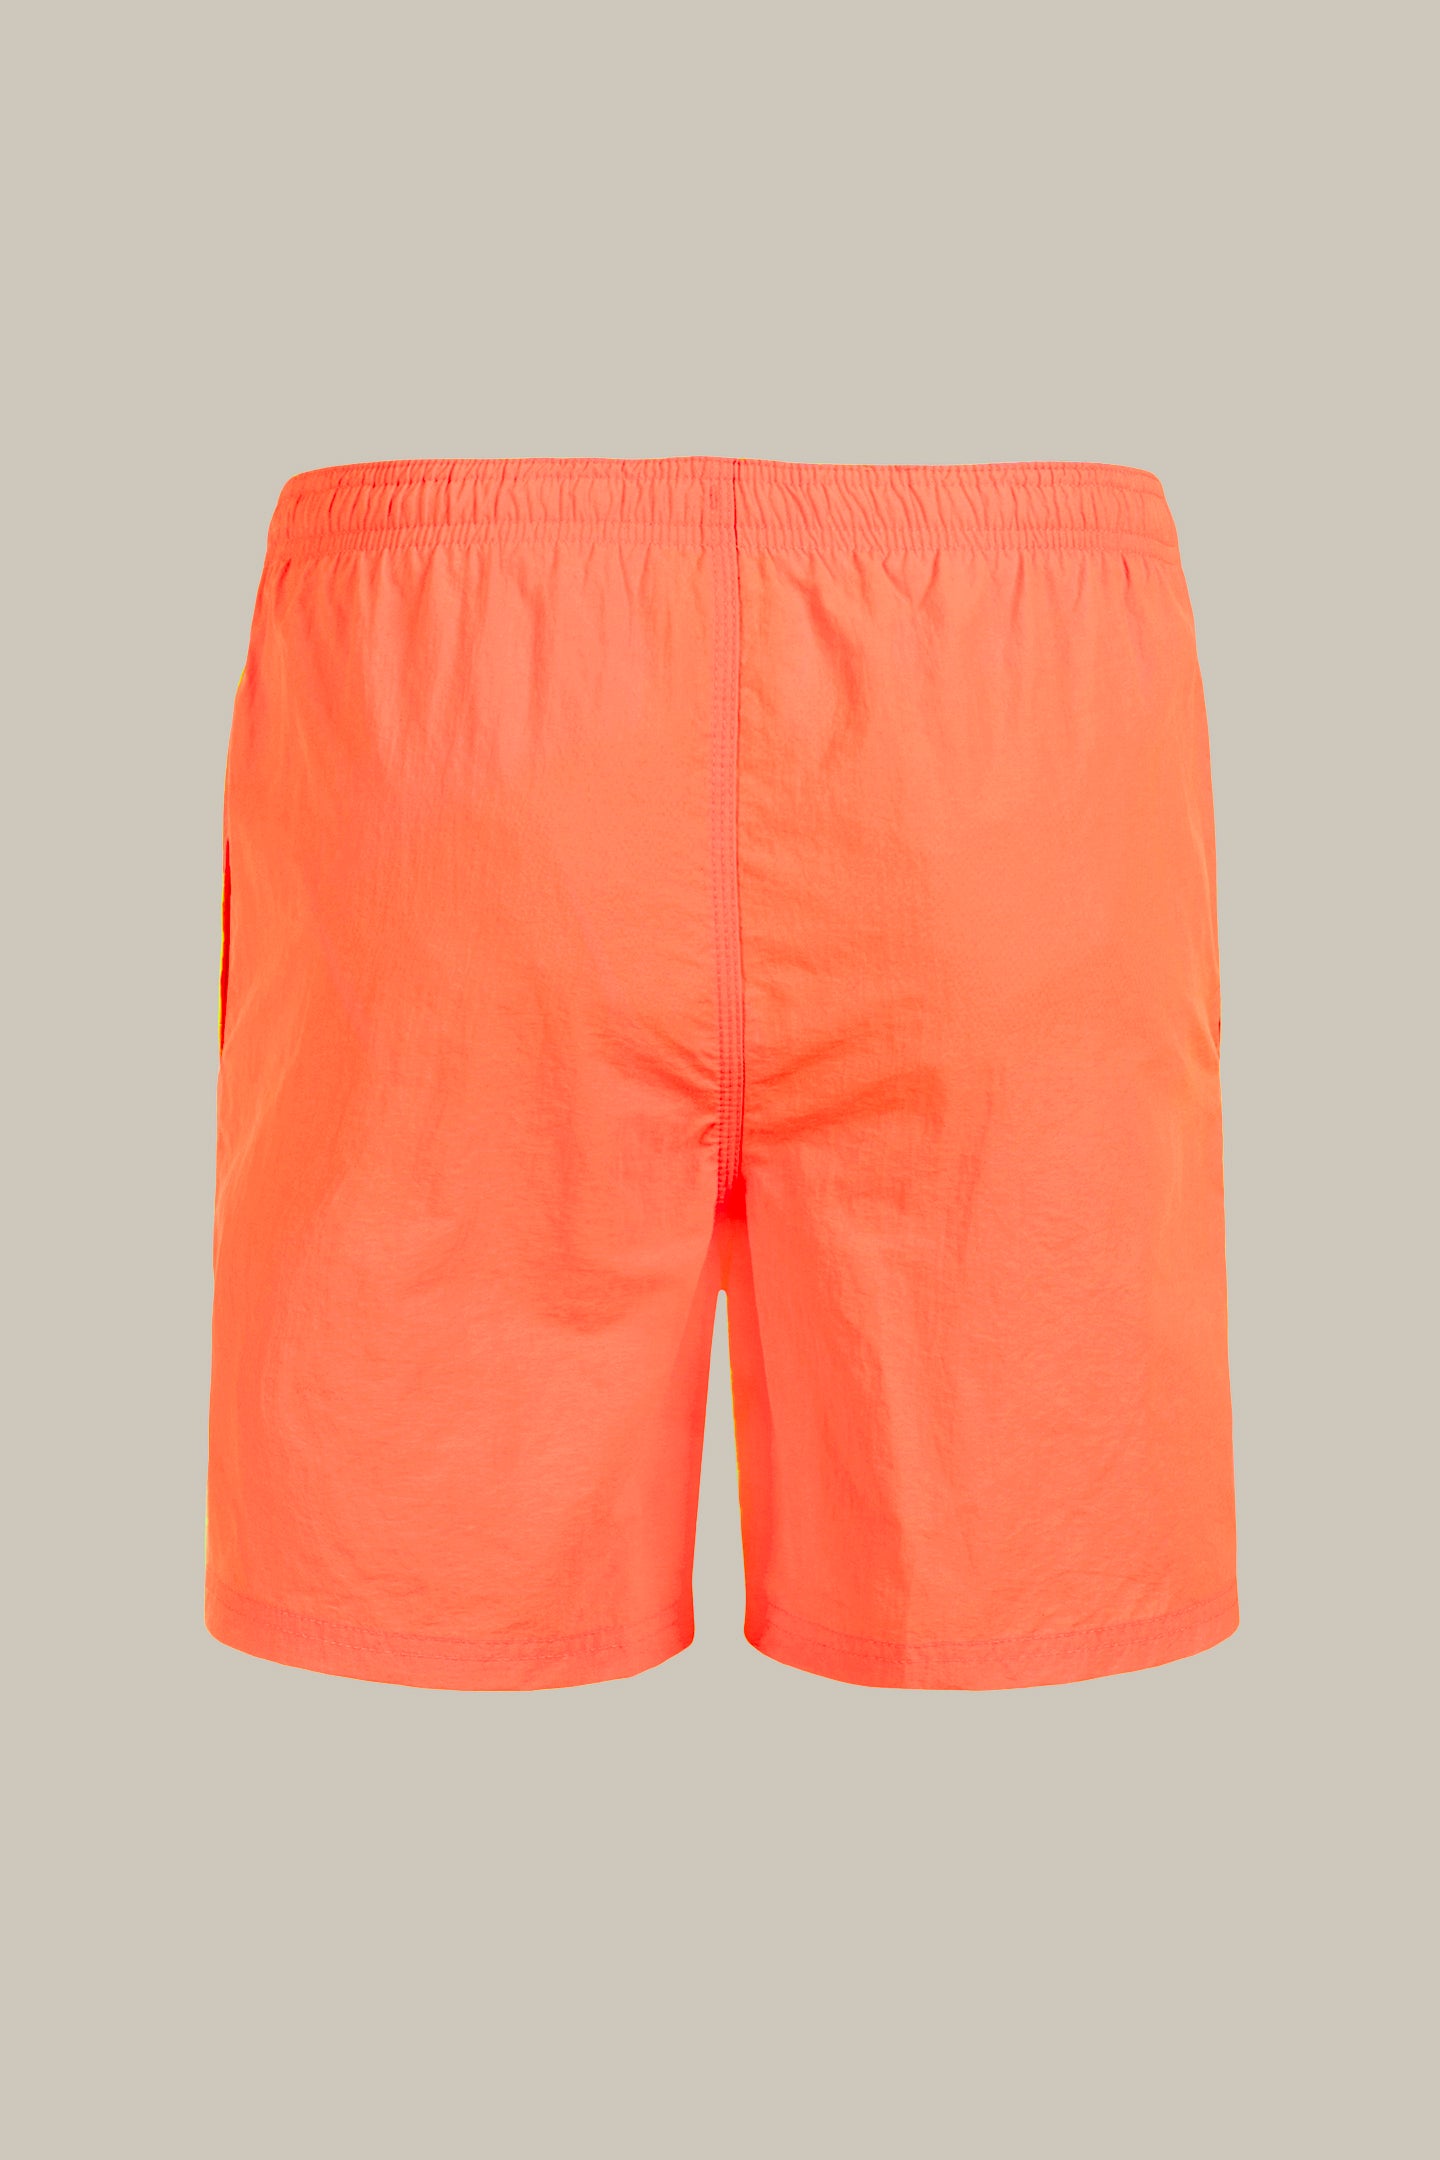 MENS FLUO BEAT VOLLEY – O'NEILL